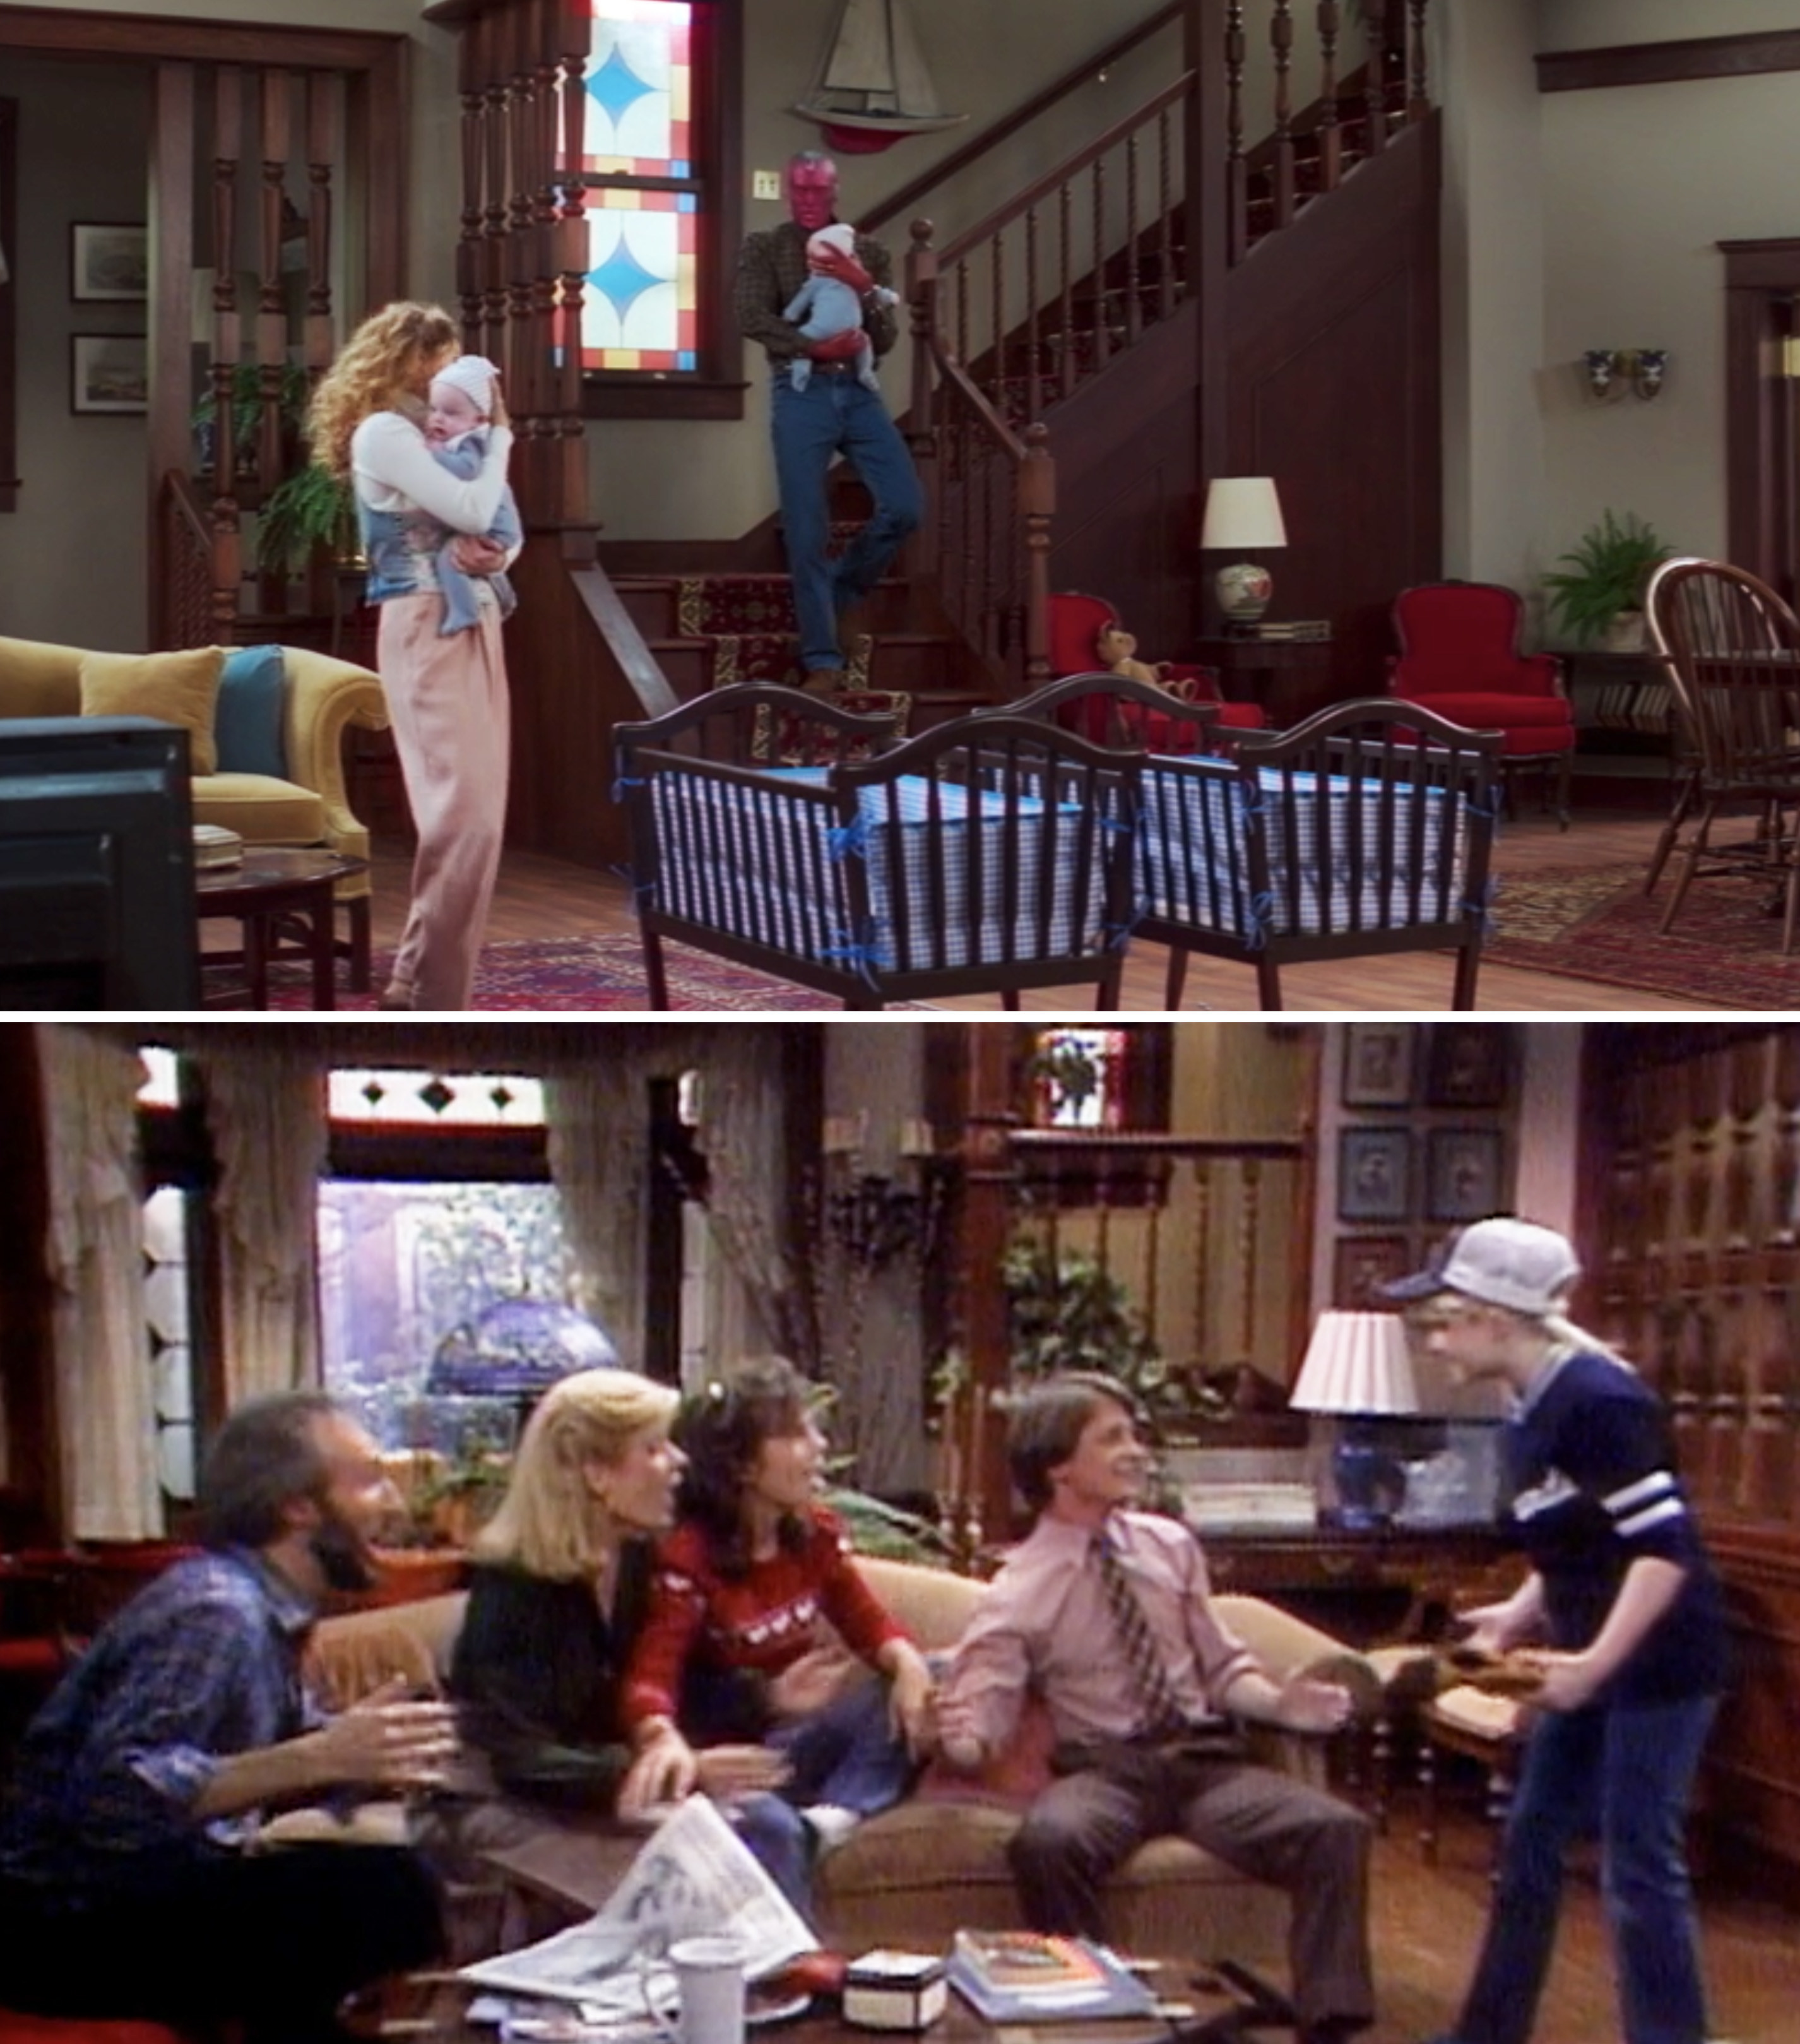 Wanda and Vision holding their twins in their living room vs. the Keaton family hanging out in their living on "Family Ties"